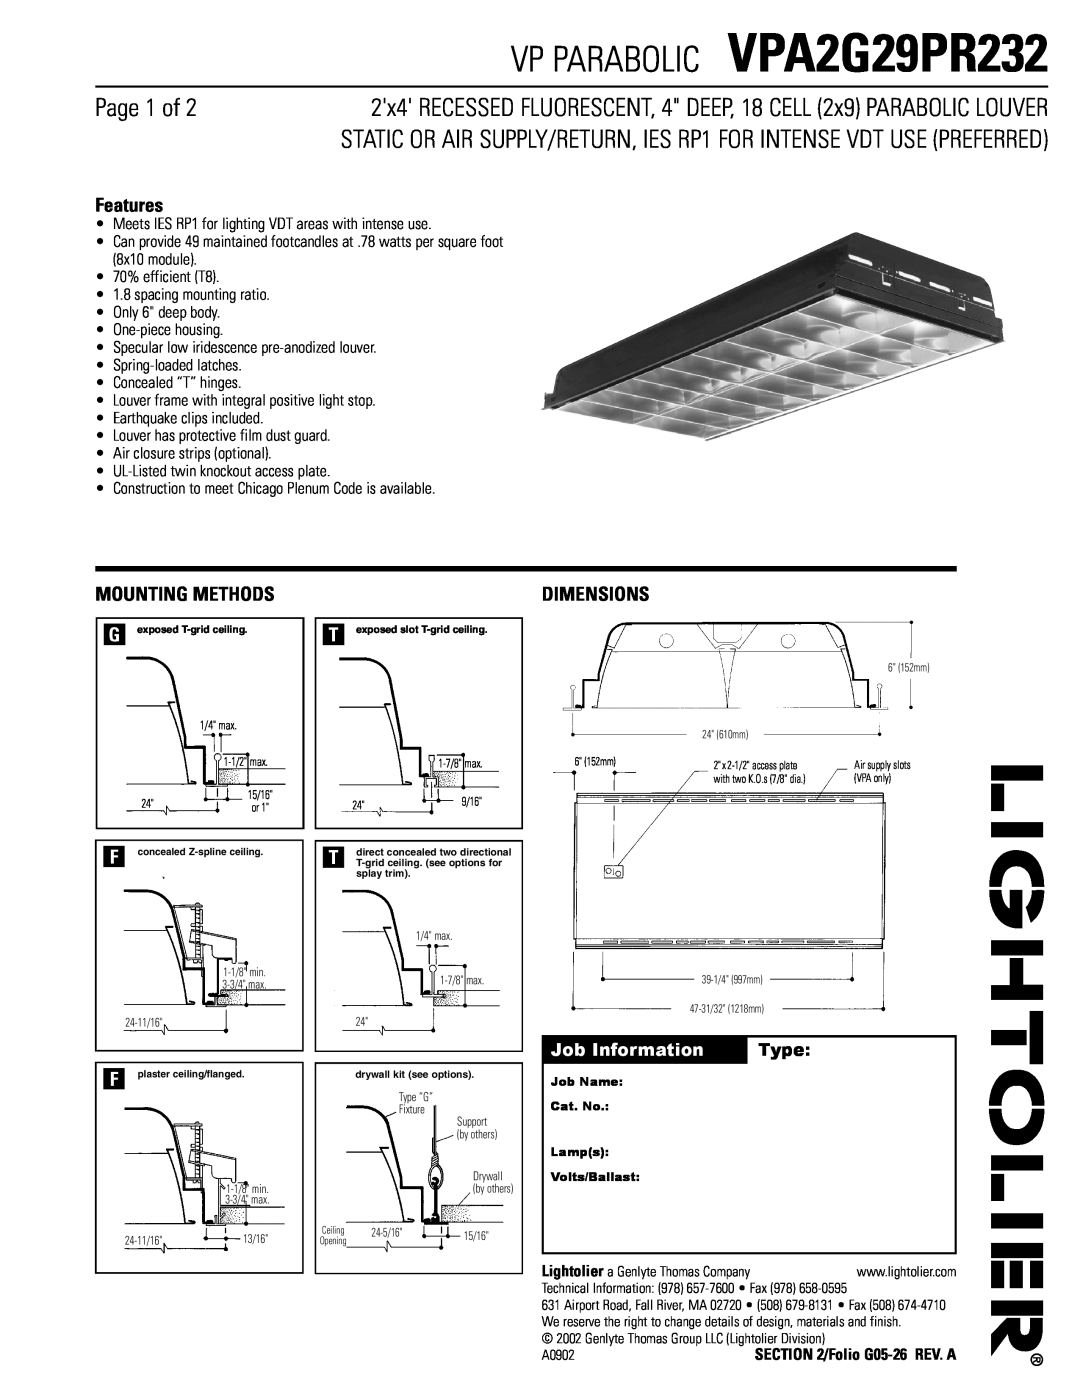 Lightolier dimensions VP PARABOLIC VPA2G29PR232, Page 1 of, Features, Mounting Methods, Dimensions 